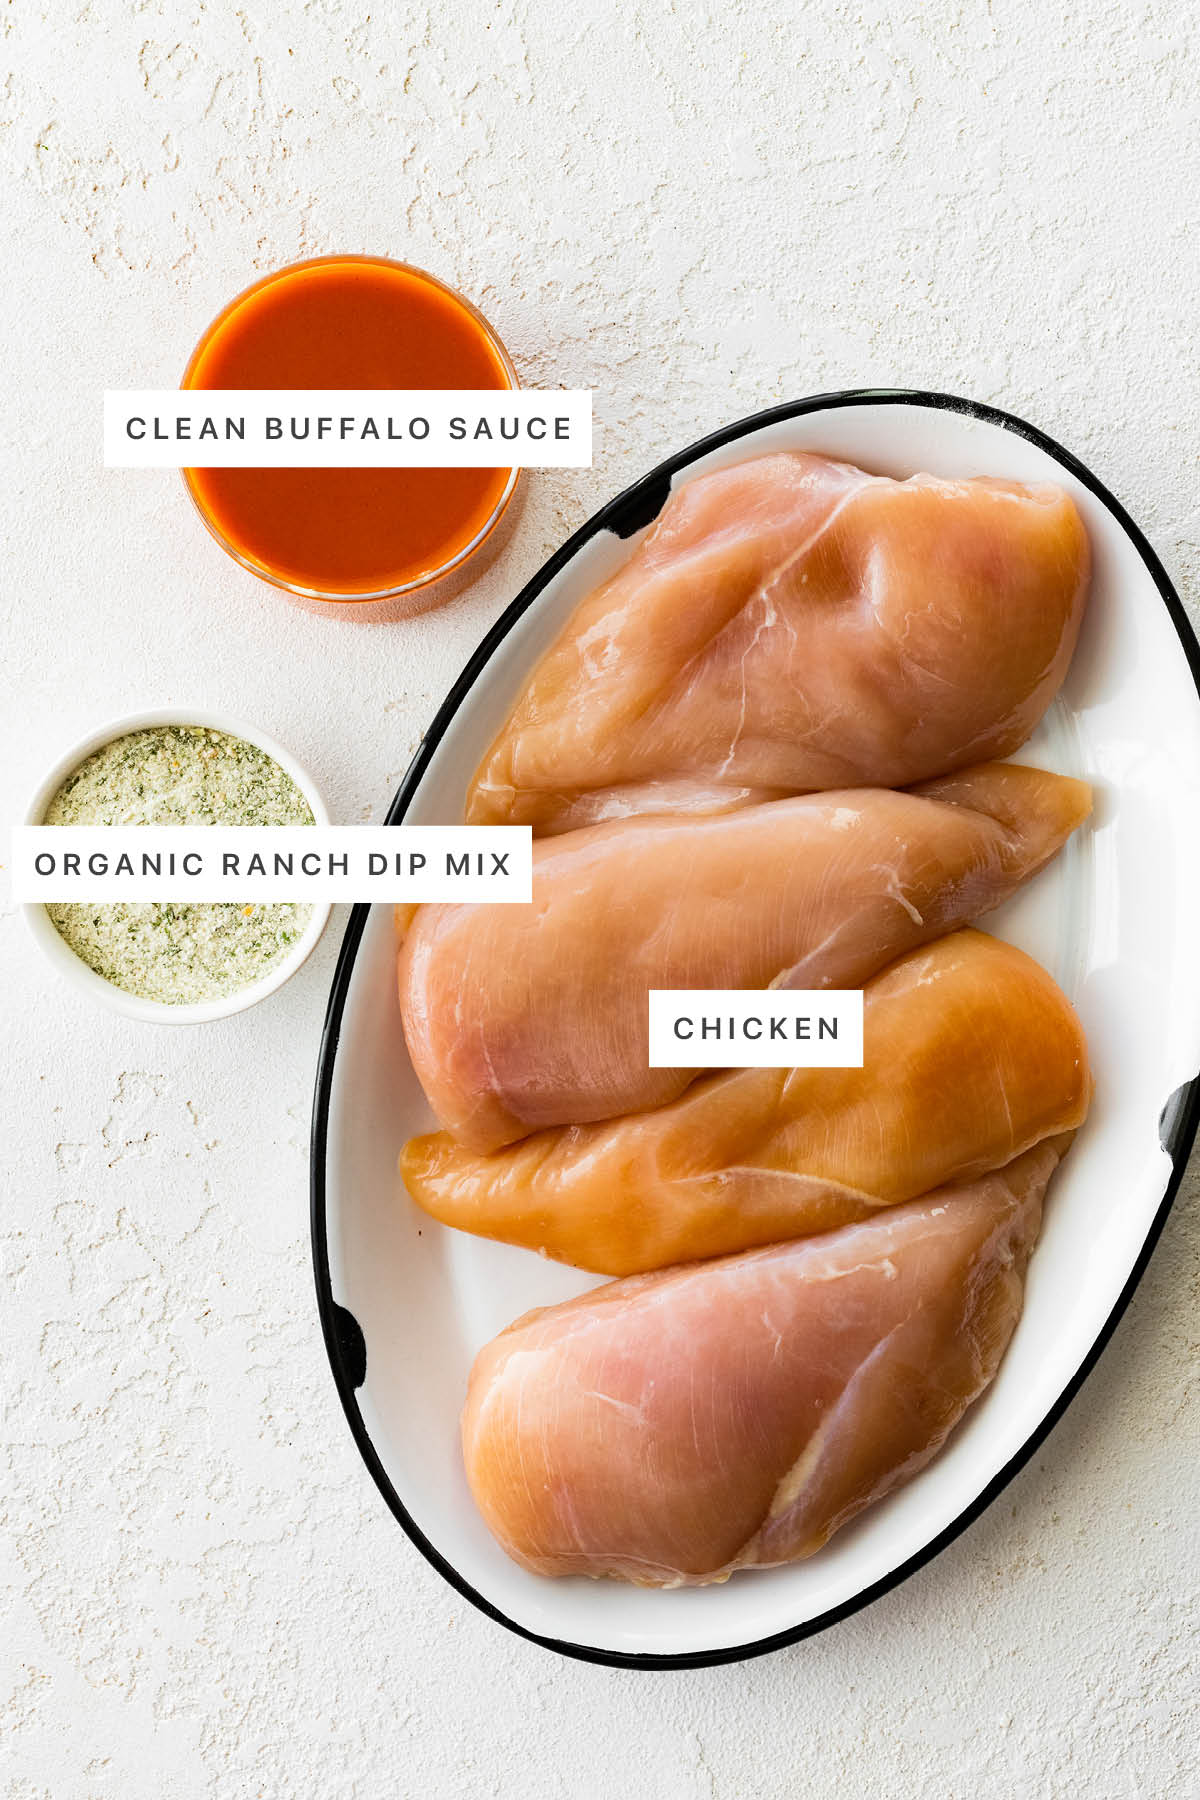 Ingredients measured out to make Slow Cooker Buffalo Chicken: clean buffalo sauce, organic ranch dip mix and chicken.